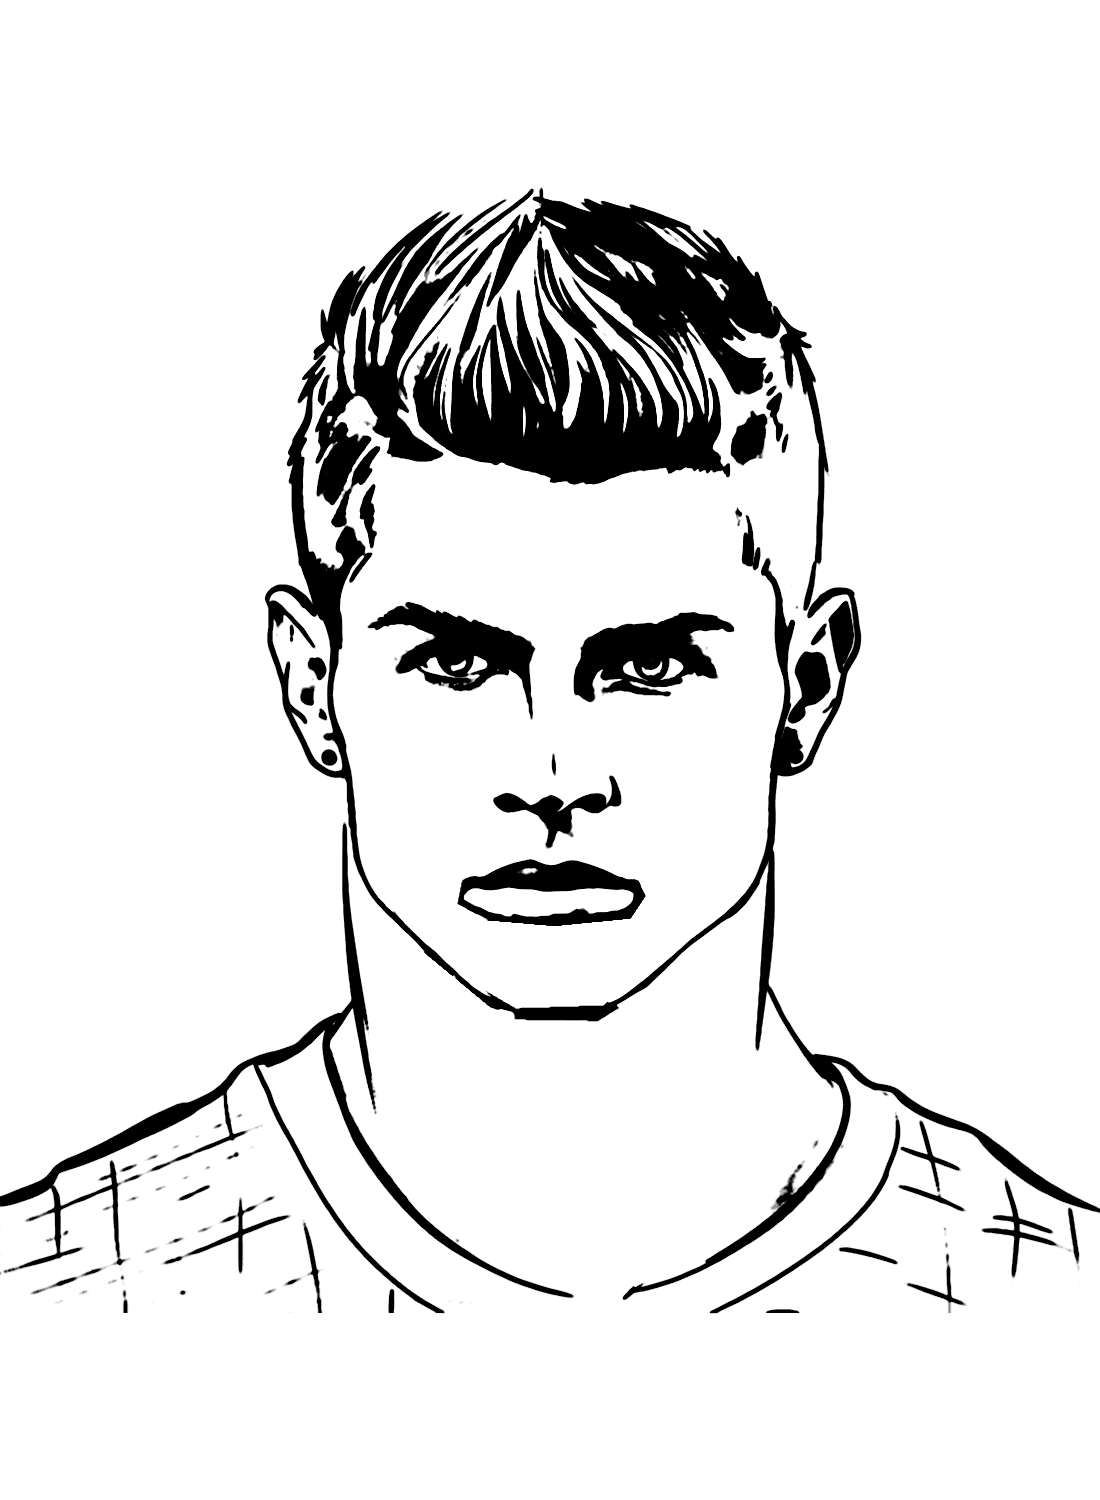 Cute Cristiano Ronaldo Drawing Coloring Pages from Cristiano Ronaldo